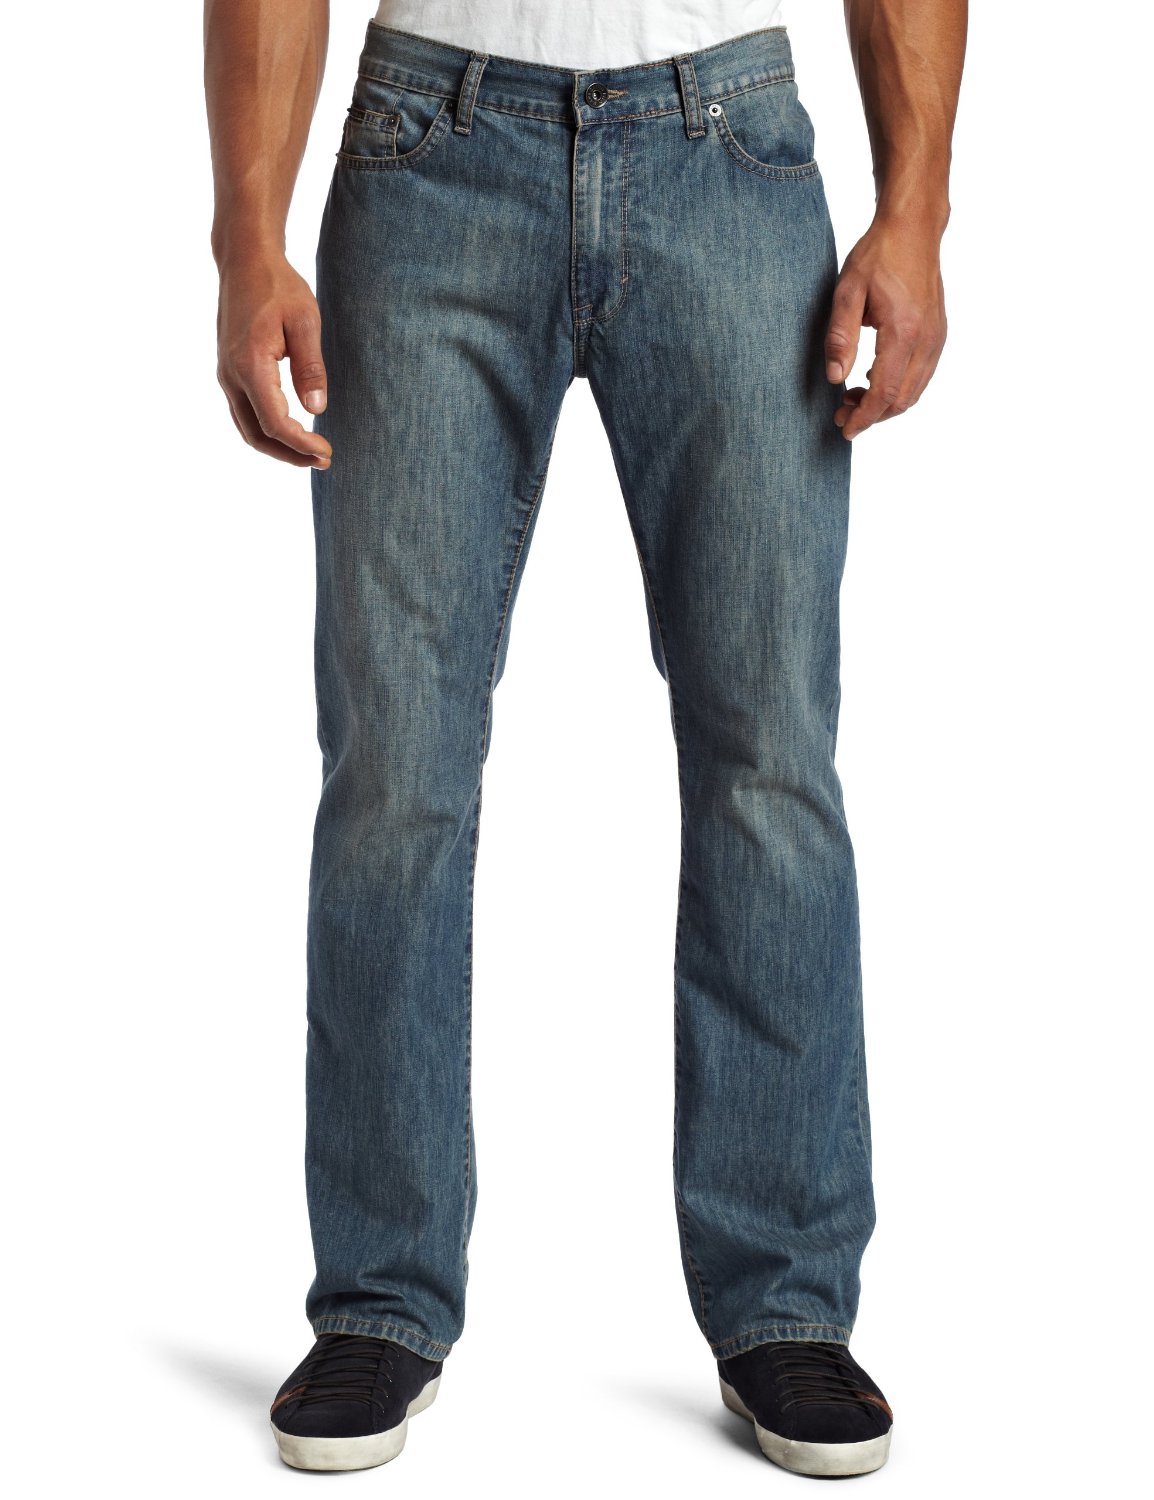 Imported Quality Jeans and T-Shirt for supply in Shop cheap large image 0